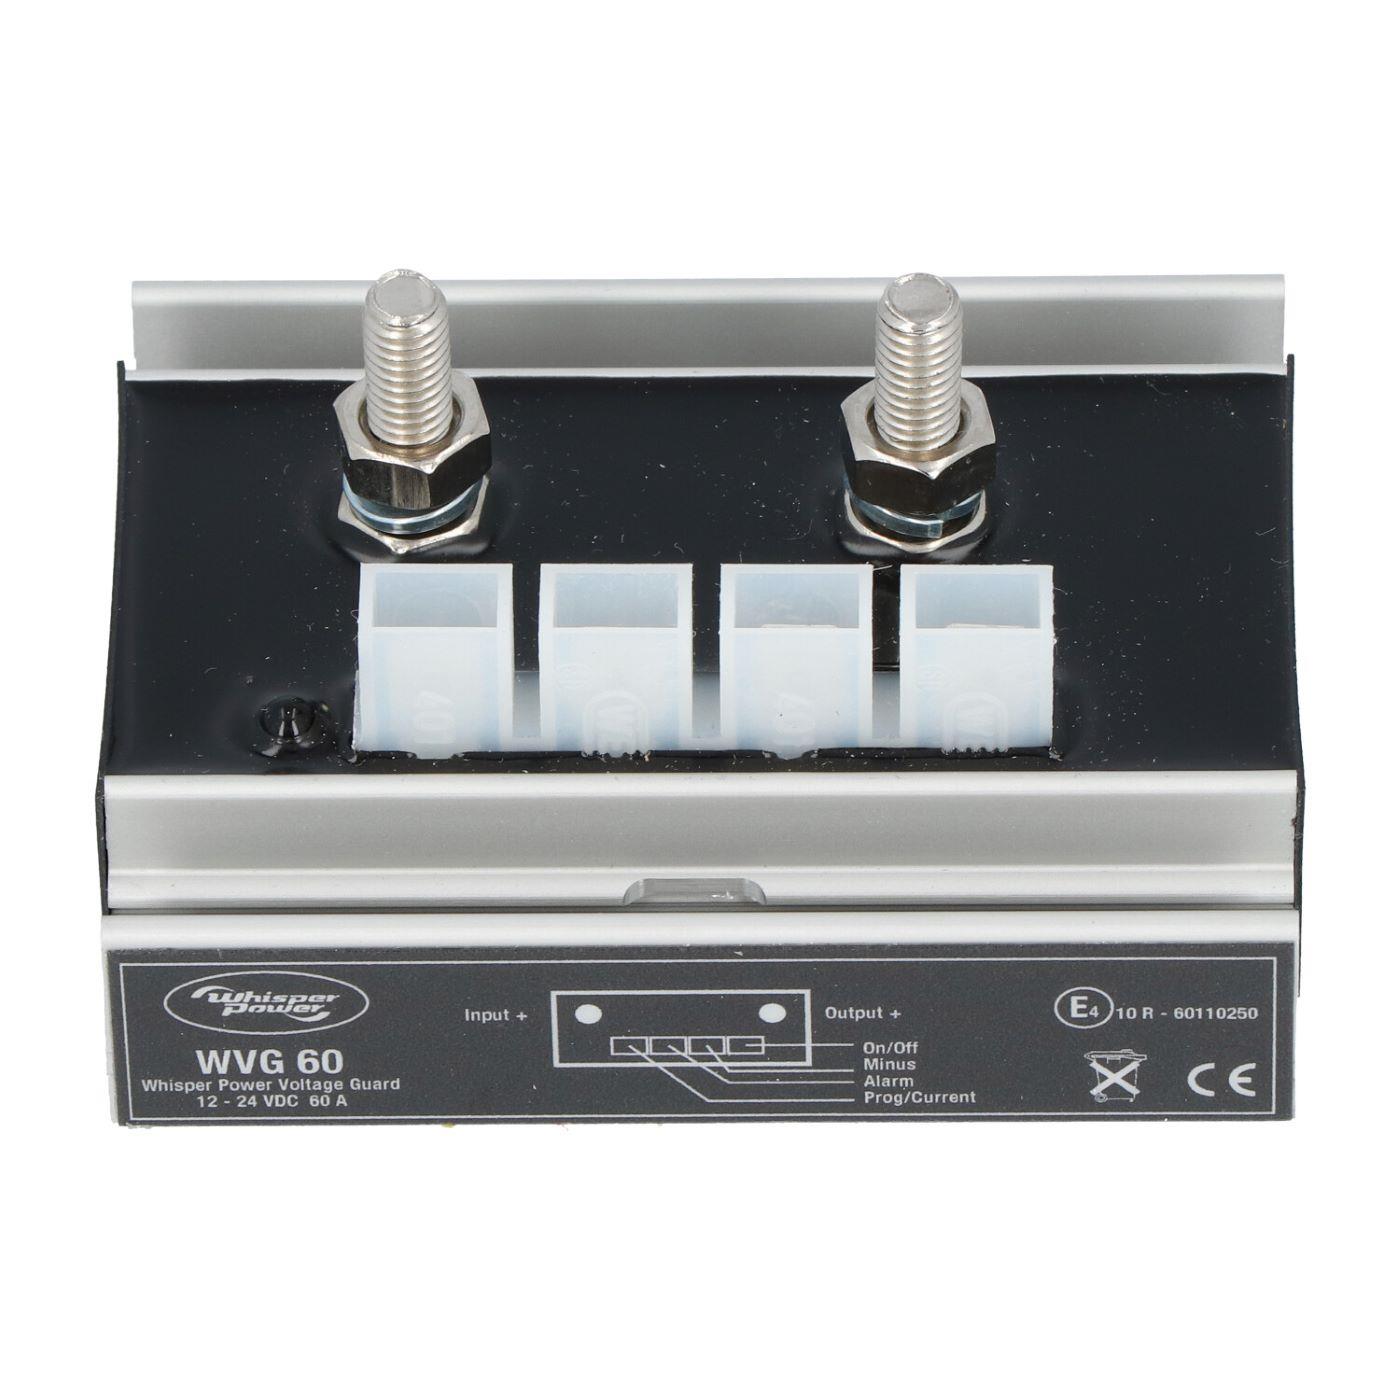 WhisperPower WVG 60 Voltage Guard 12-24V DC / 60 A Programmable